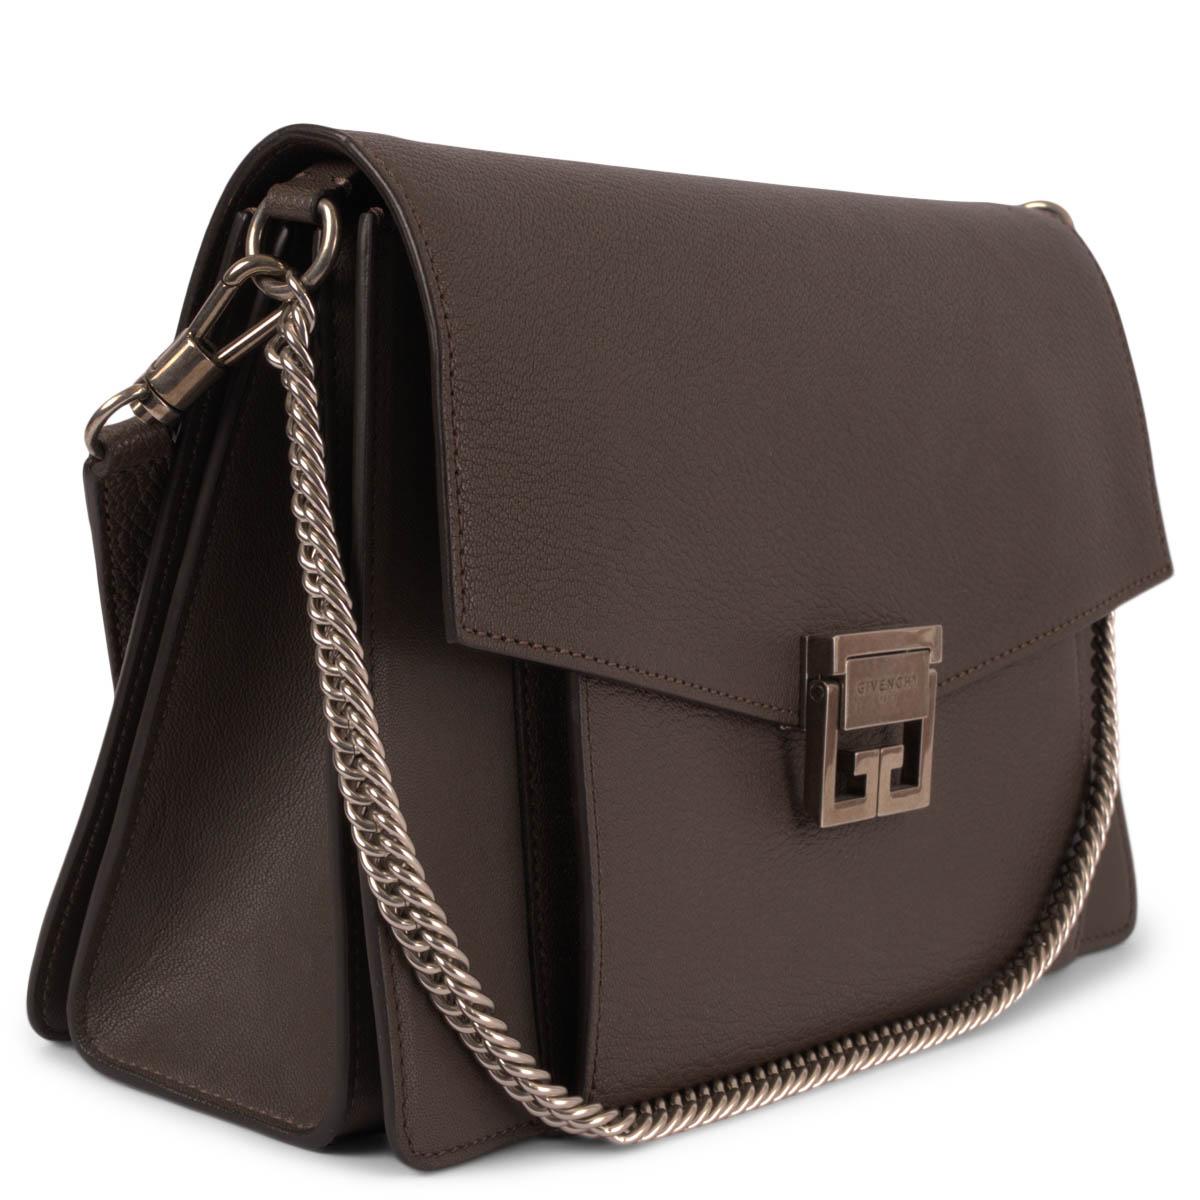 100% authentic Givenchy GV3 Medium shoulder bag in dark taupe grained calfskin with antique silber-tone hardware. The design features a detachable short chain shoulder-strap and a long detachable leather shoulder-strap. The interior is divided in